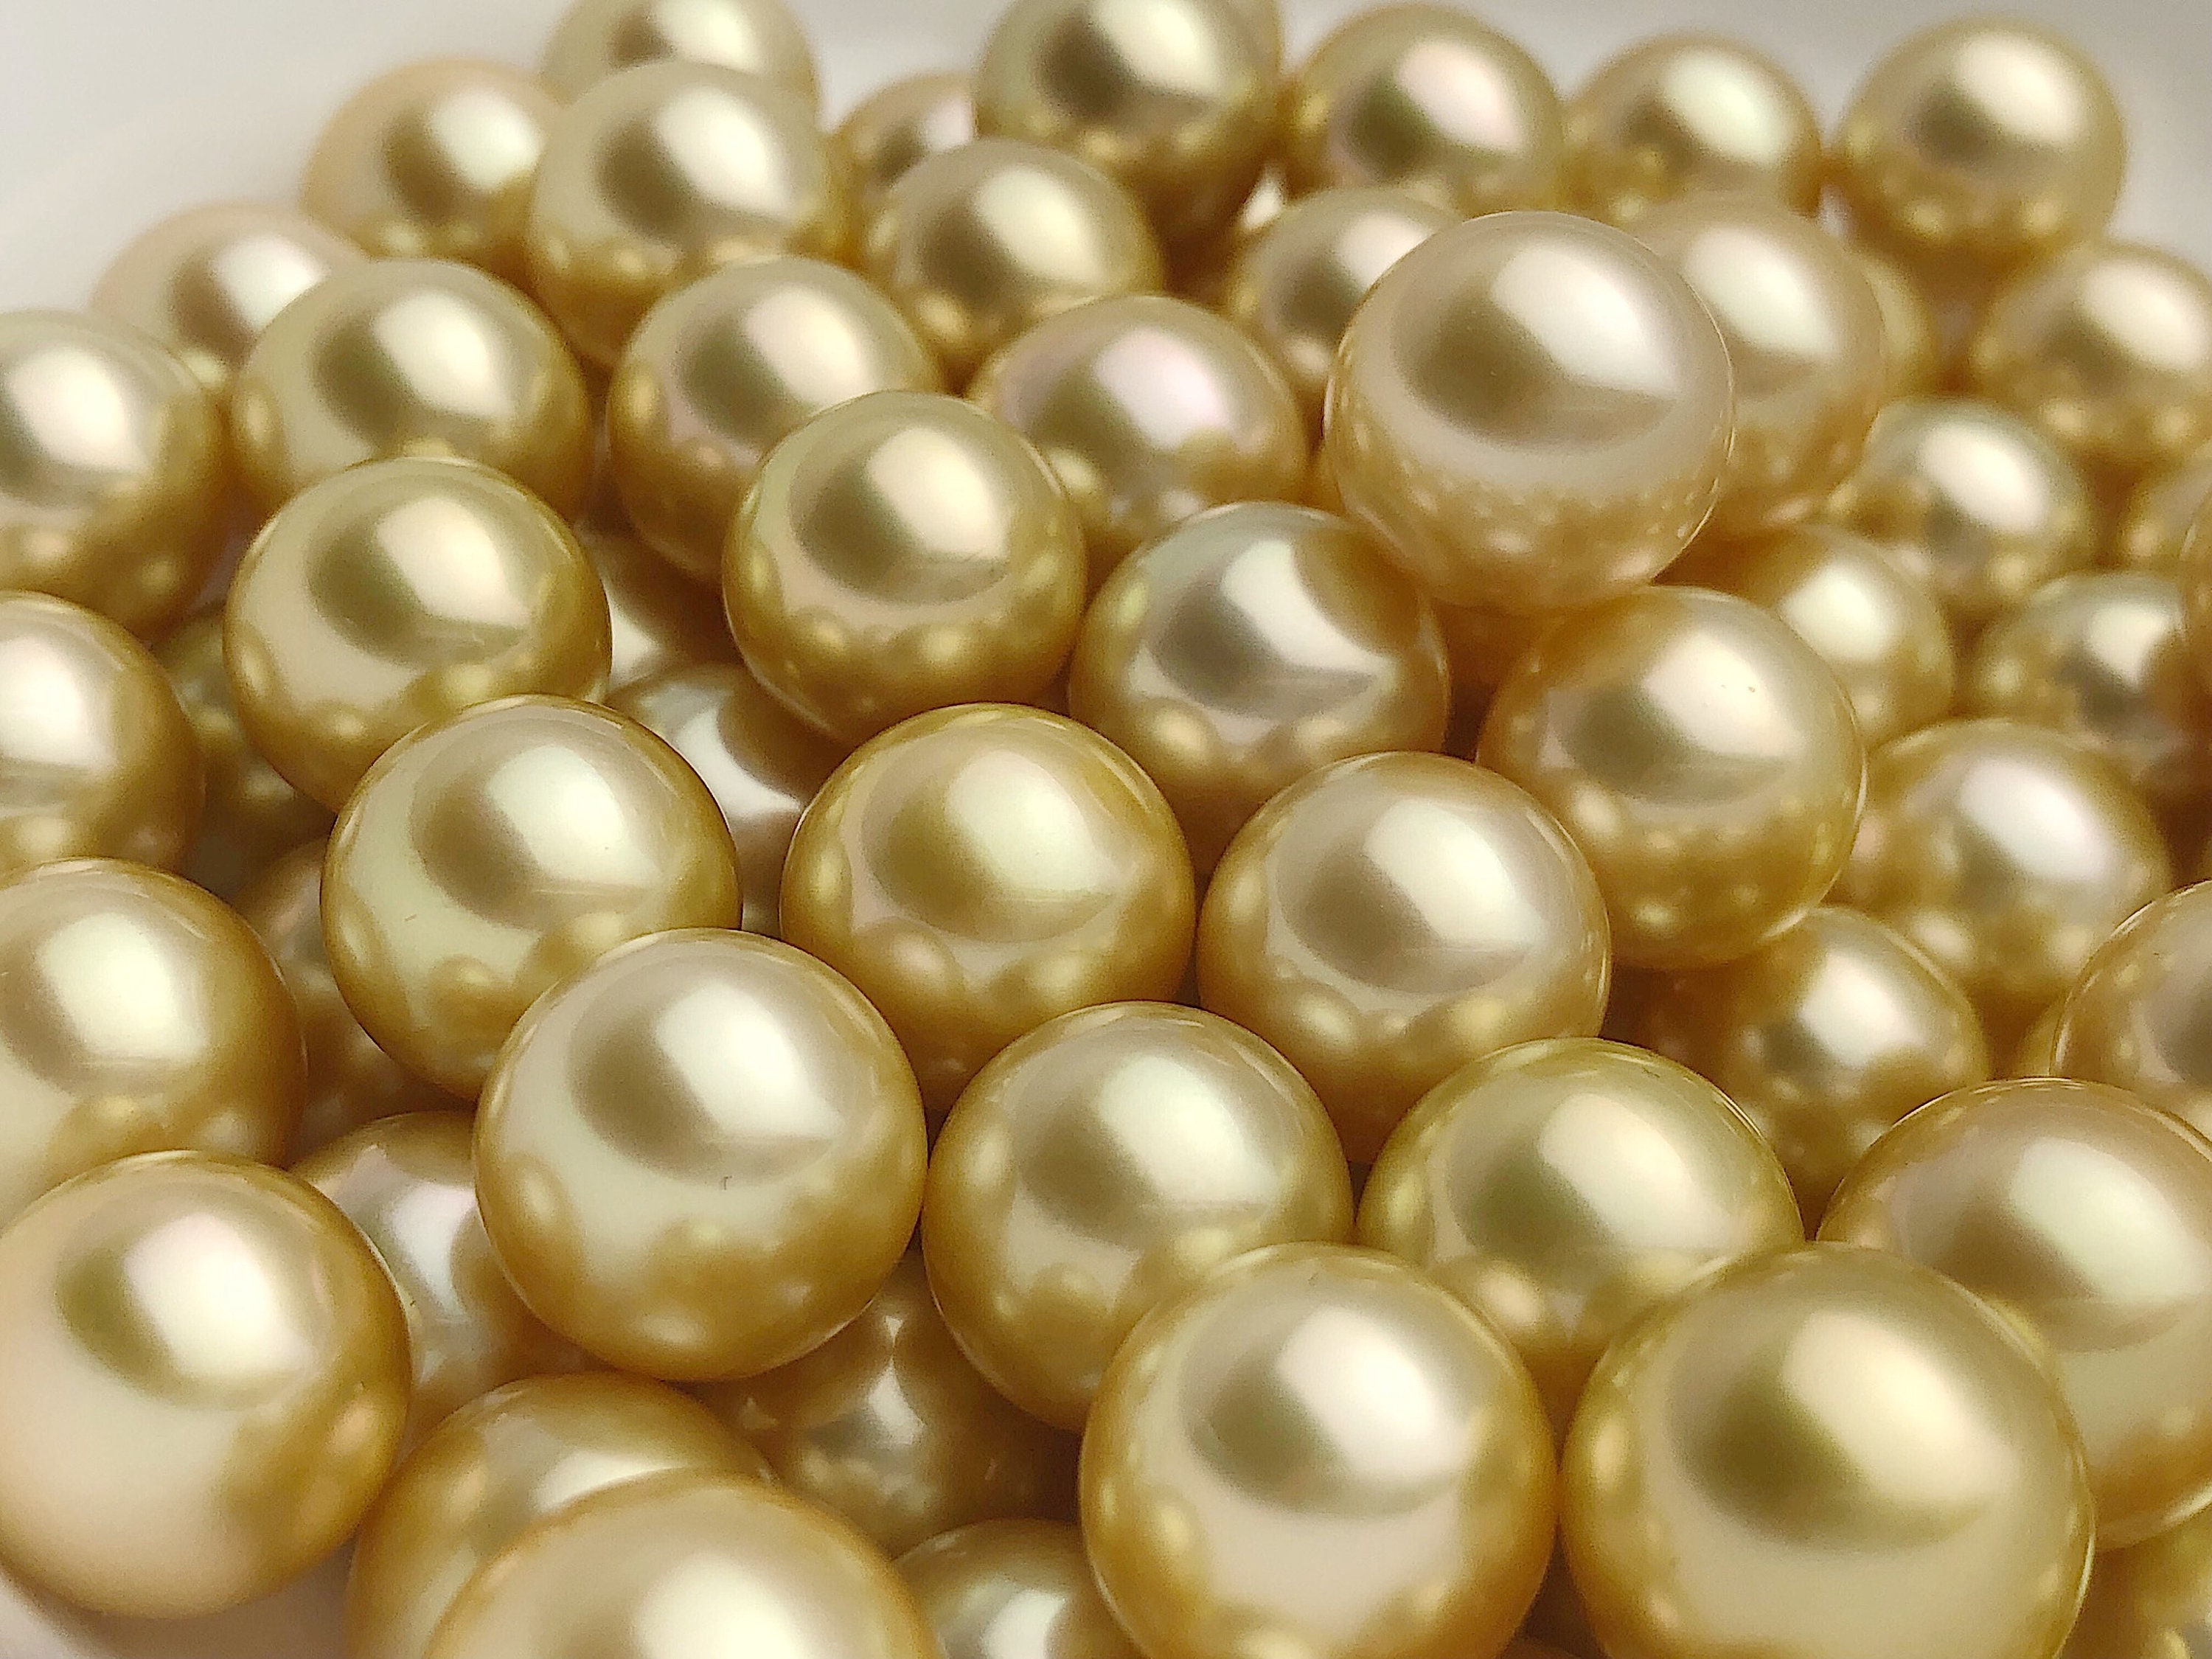 11-15mm Golden Round/Near-Round South Sea Loose Pearls